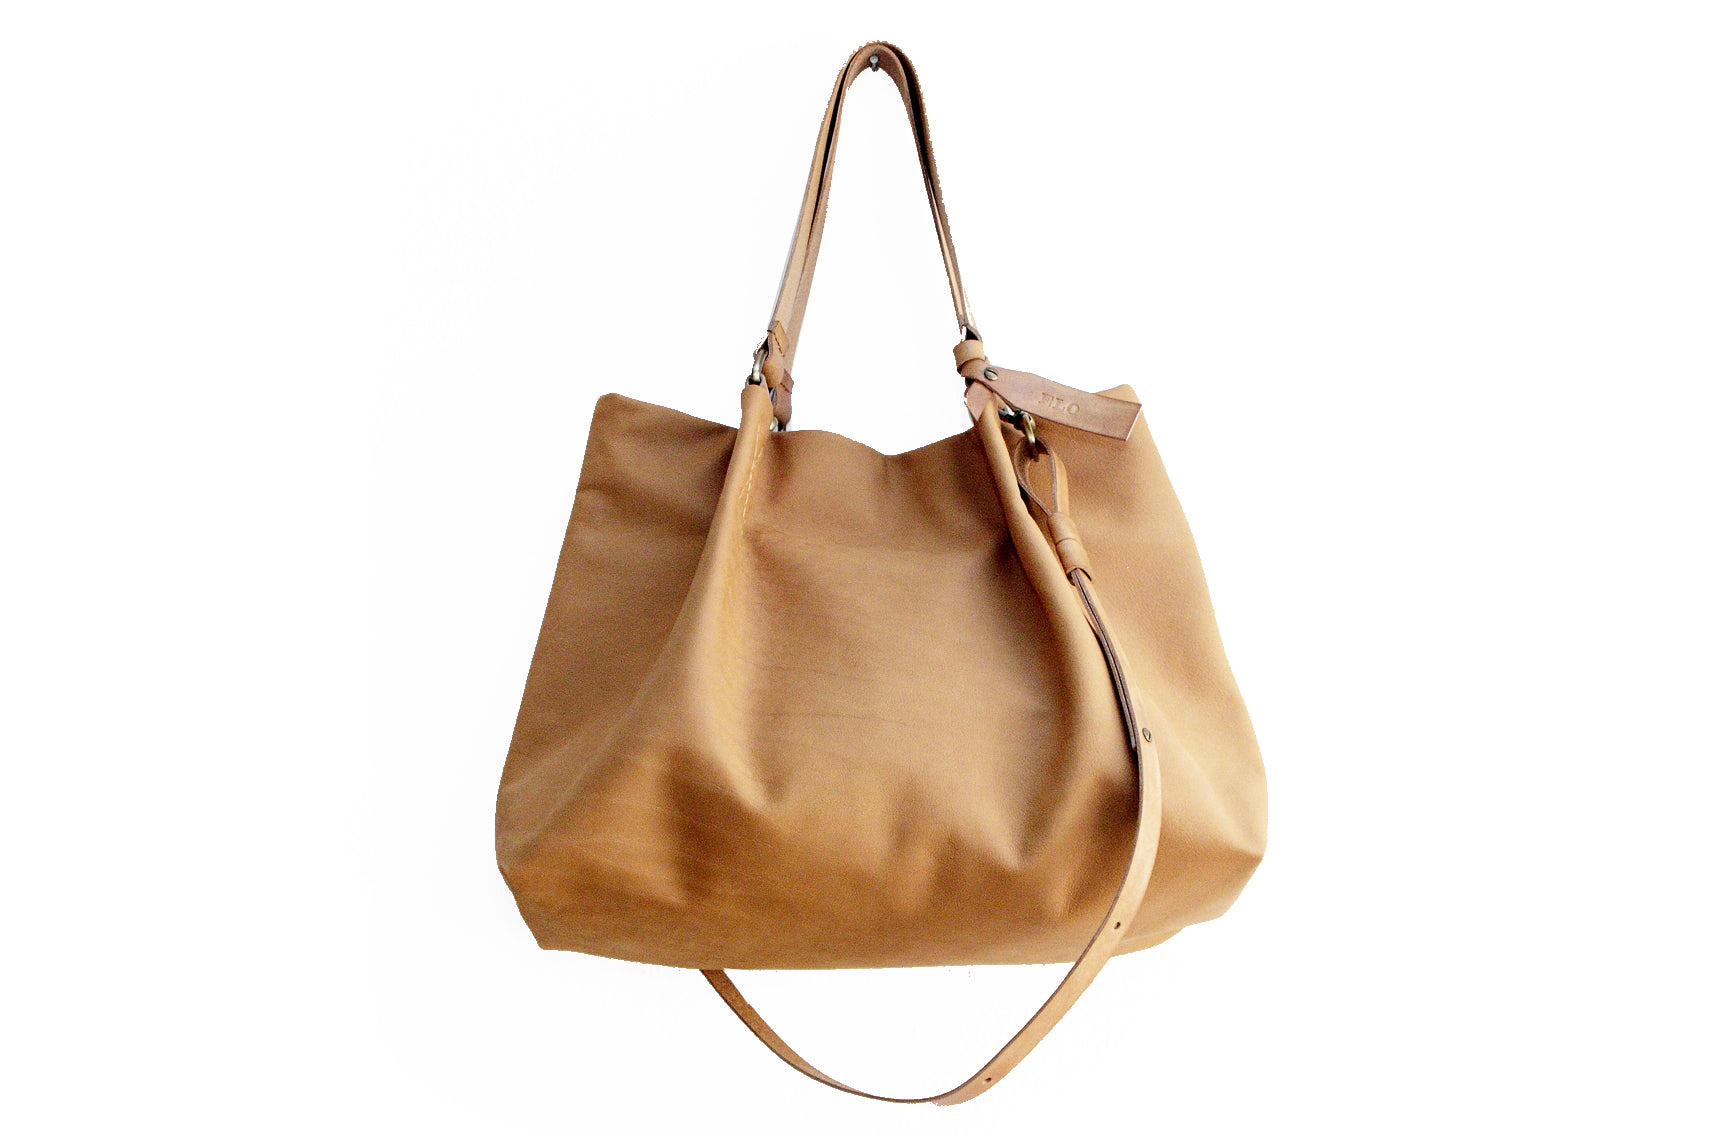 Large Tote Bag Leather Brown - Handmade In Italy